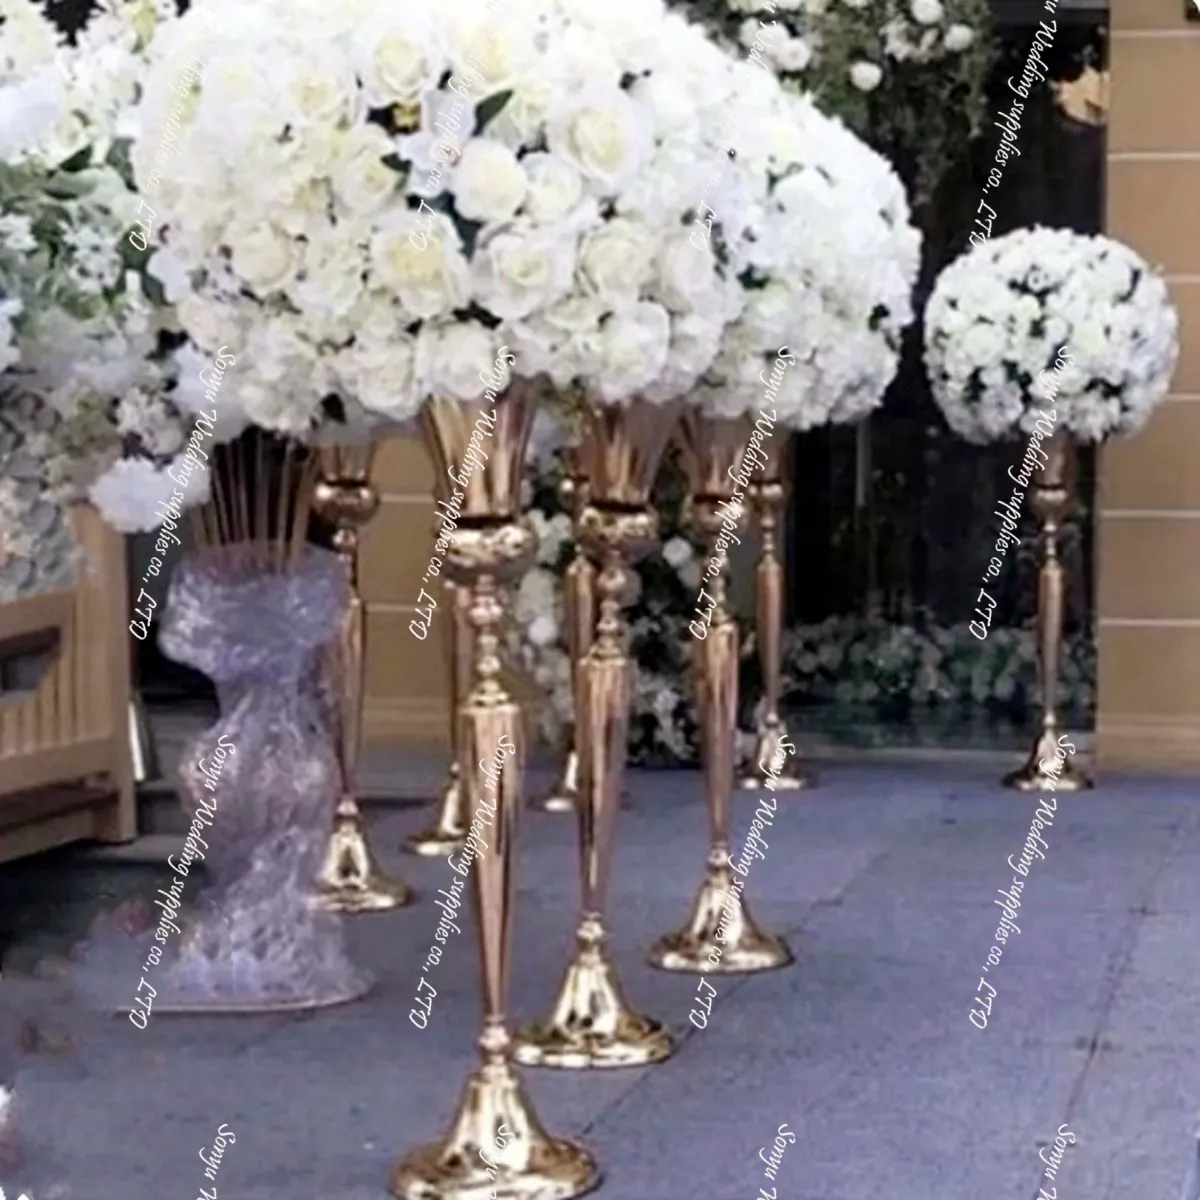 Gold Staircase Flower Stand For Weddings And Event Center Elegant Tabletop  Display For Floral Ambiance From David137, $28.31